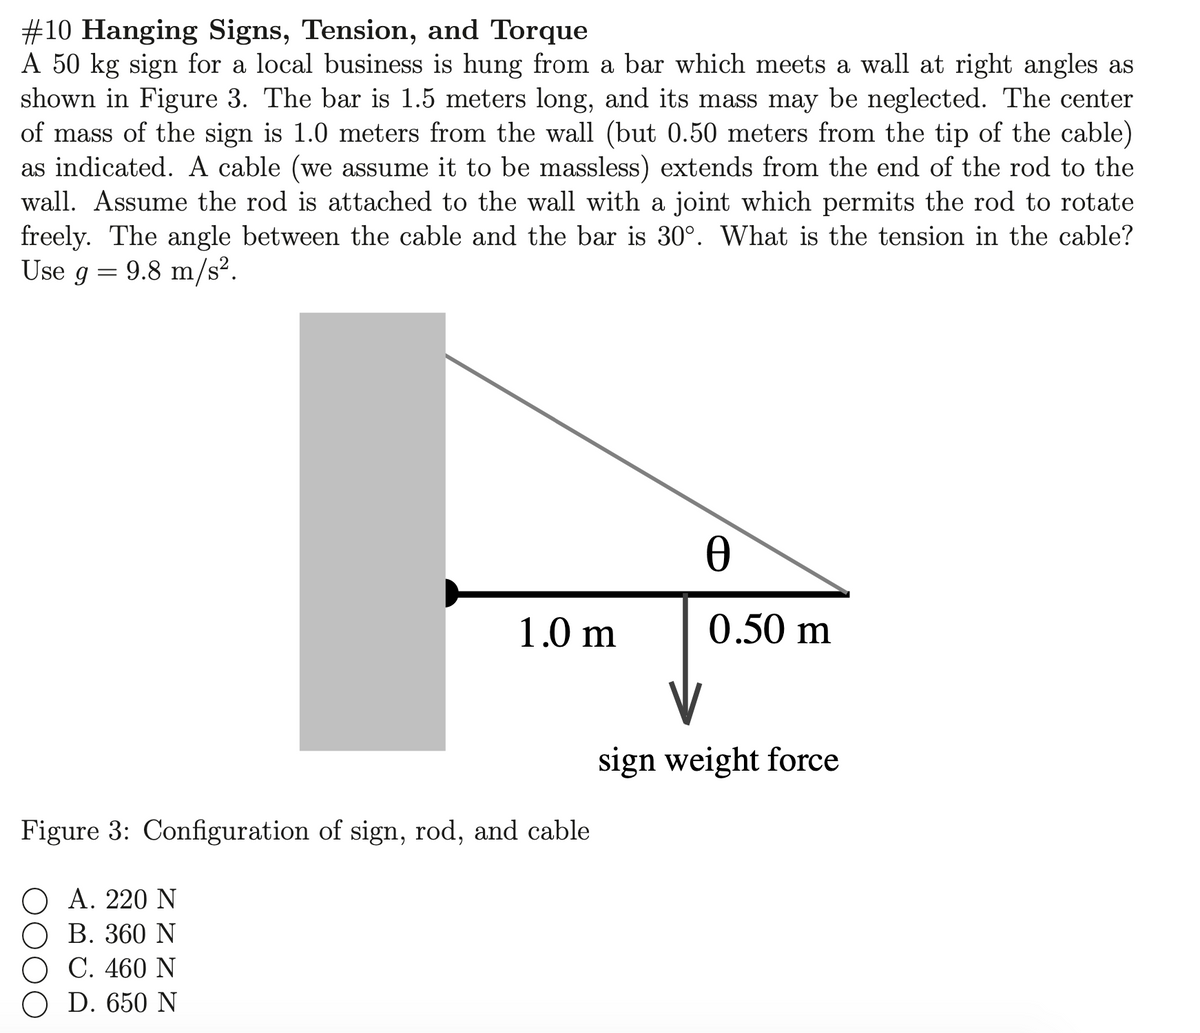 #10 Hanging Signs, Tension, and Torque
A 50 kg sign for a local business is hung from a bar which meets a wall at right angles as
shown in Figure 3. The bar is 1.5 meters long, and its mass may be neglected. The center
of mass of the sign is 1.0 meters from the wall (but 0.50 meters from the tip of the cable)
as indicated. A cable (we assume it to be massless) extends from the end of the rod to the
wall. Assume the rod is attached to the wall with a joint which permits the rod to rotate
freely. The angle between the cable and the bar is 30°. What is the tension in the cable?
Use g = 9.8 m/s².
1.0 m
0.50 m
sign weight force
Figure 3: Configuration of sign, rod, and cable
Α. 220 Ν
ОВ. 360 N
O C. 460 N
O D. 650 N
